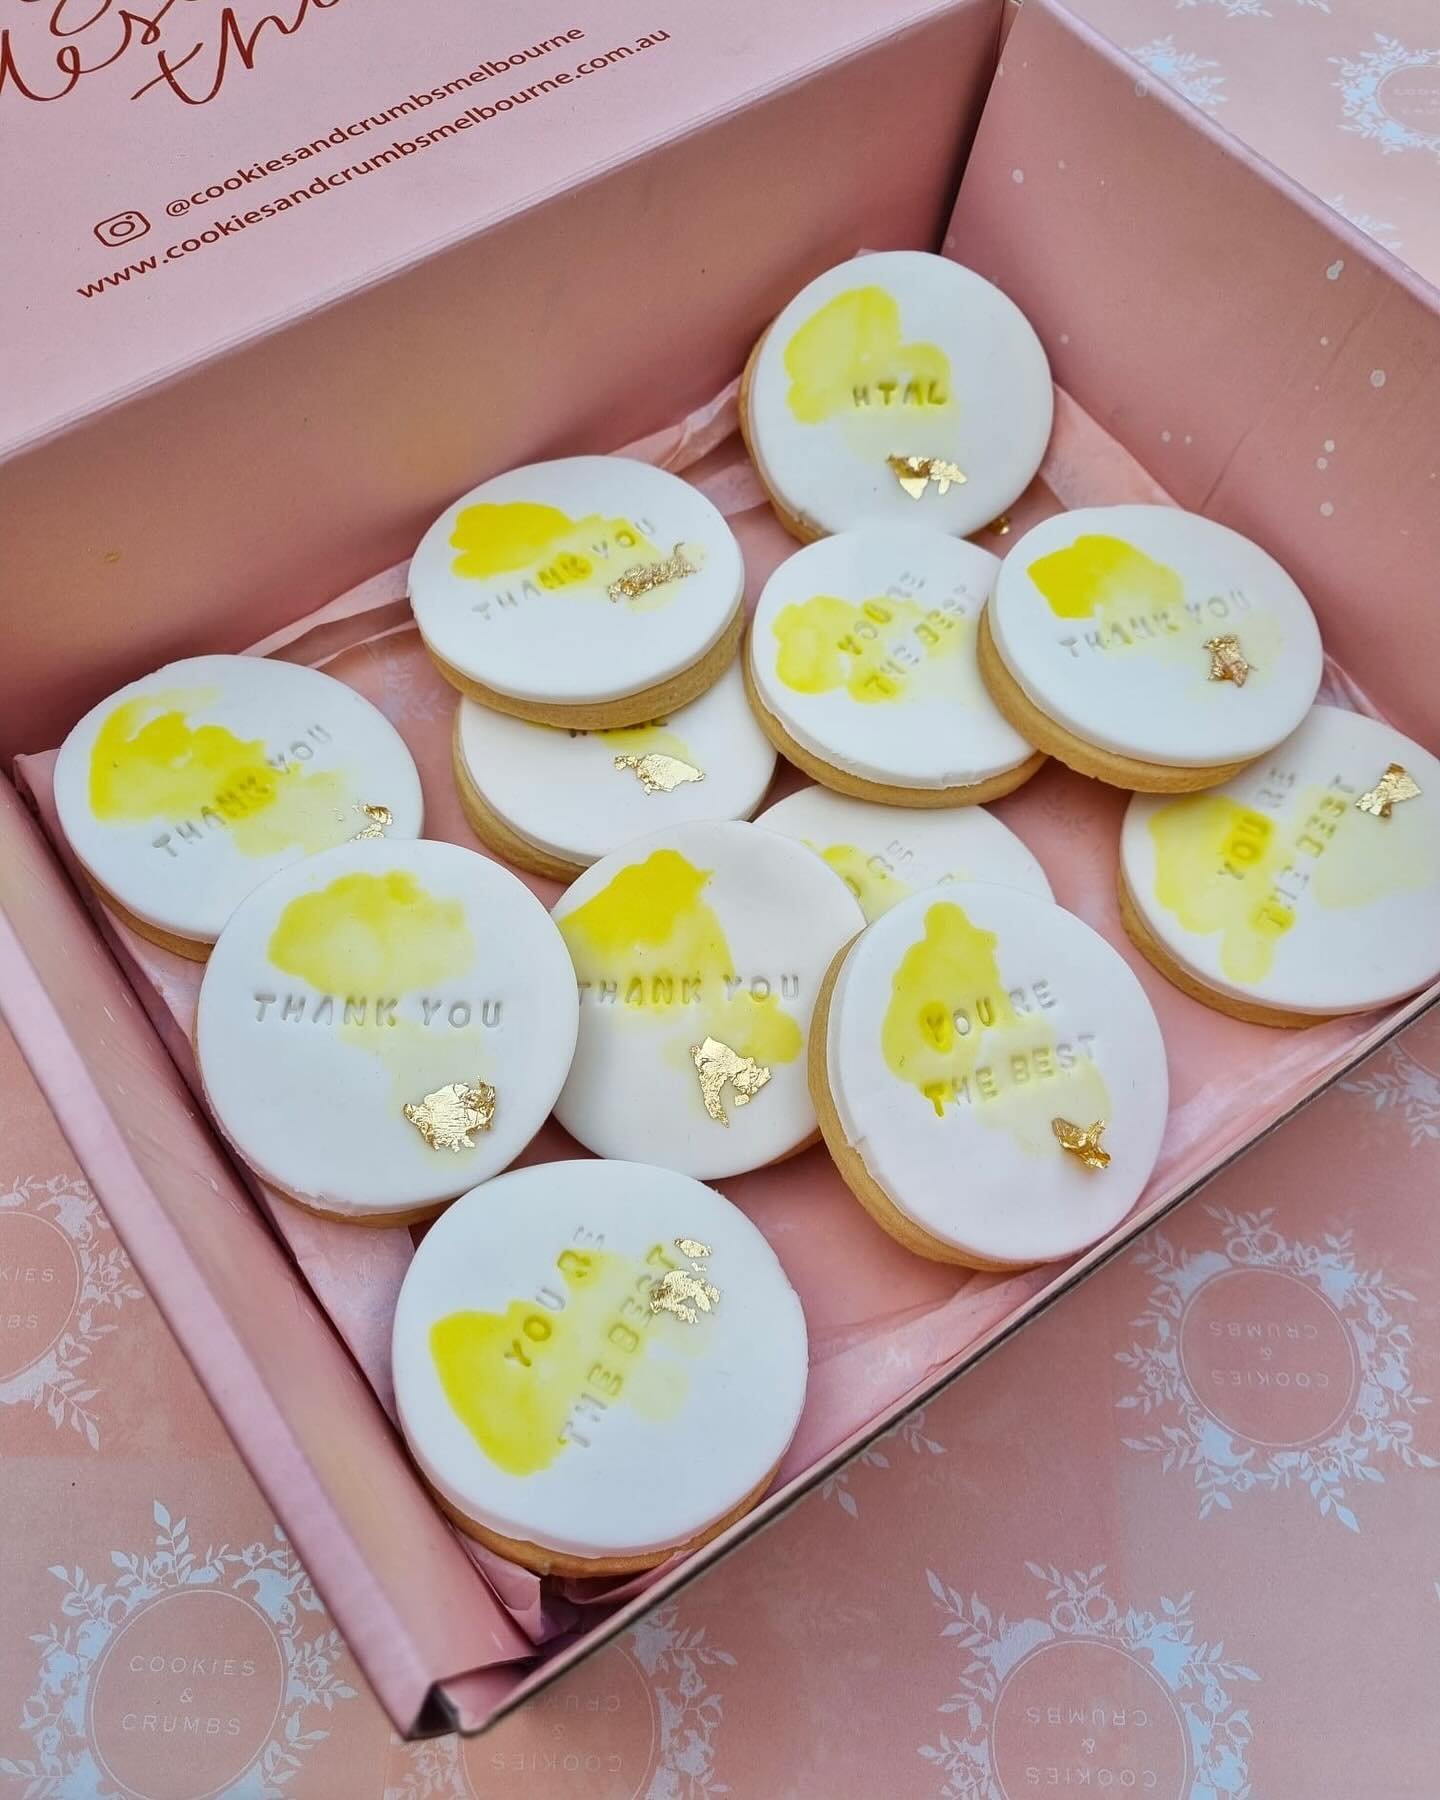 When the light hits all the right places! 🍋🍪😋 Loving this yellow watercolour! 🥰